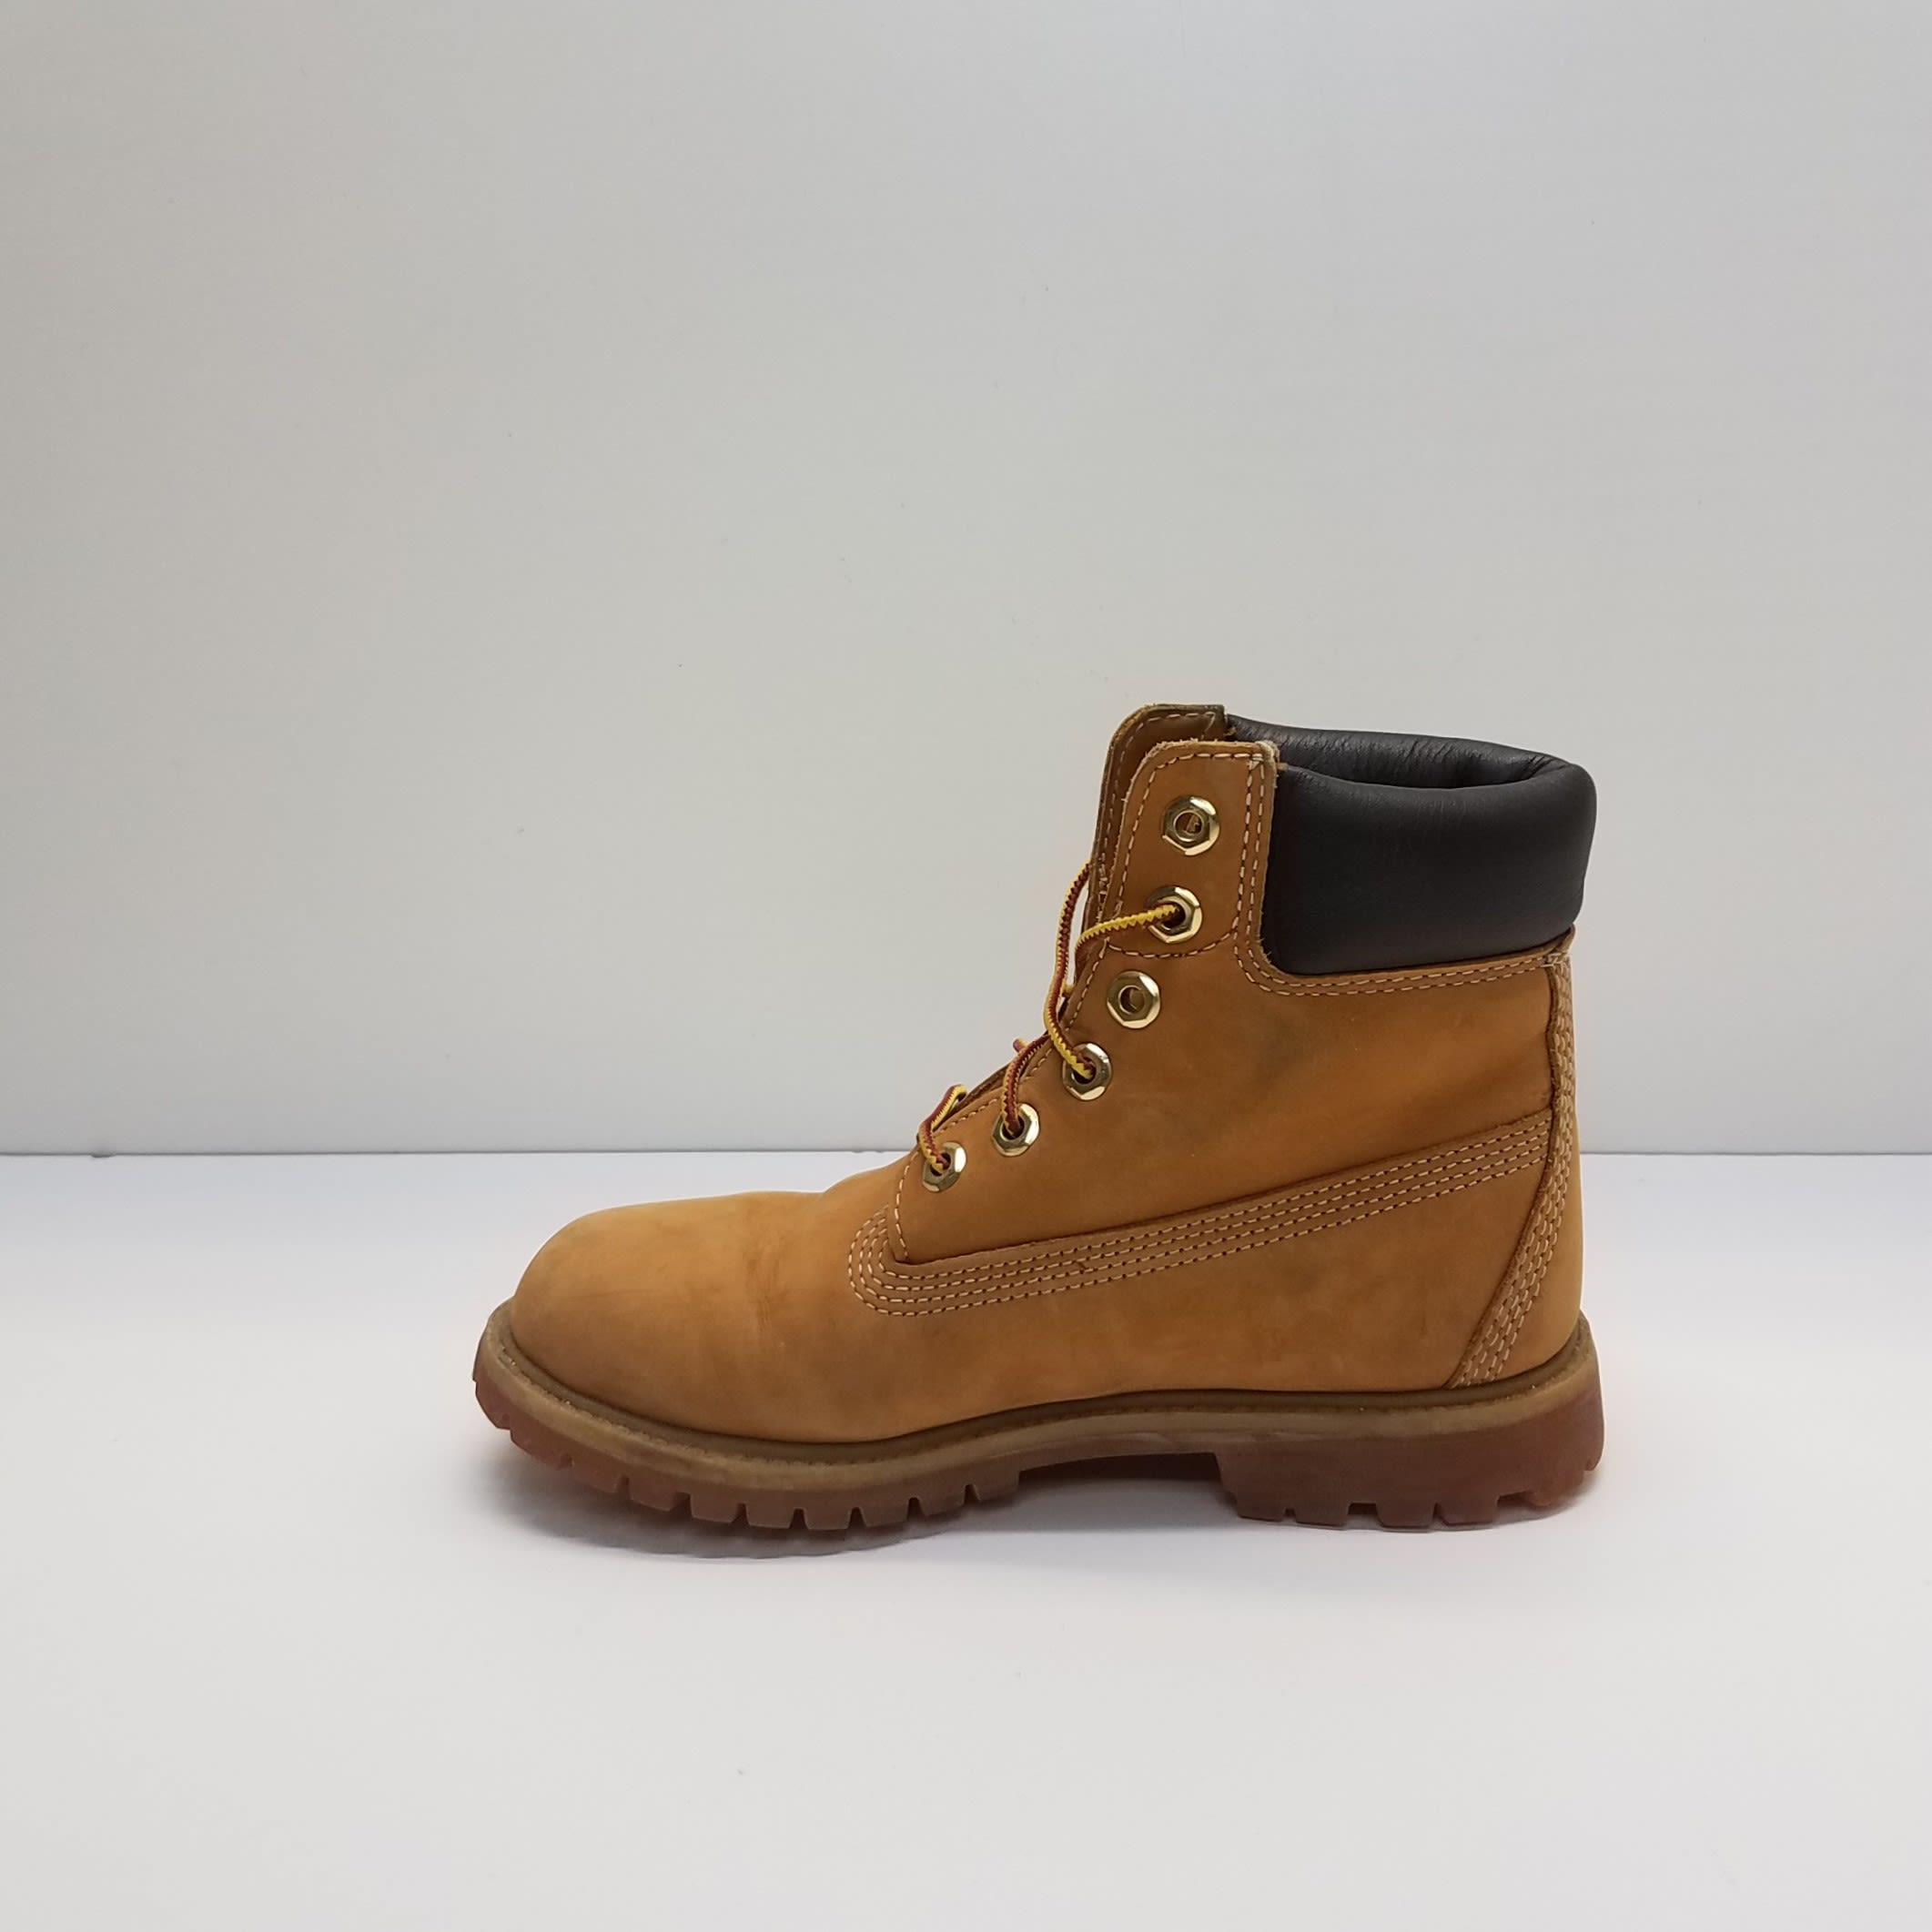 Buy the Timberland Waterproof Boots Size 6.5 Tan 10361 | GoodwillFinds